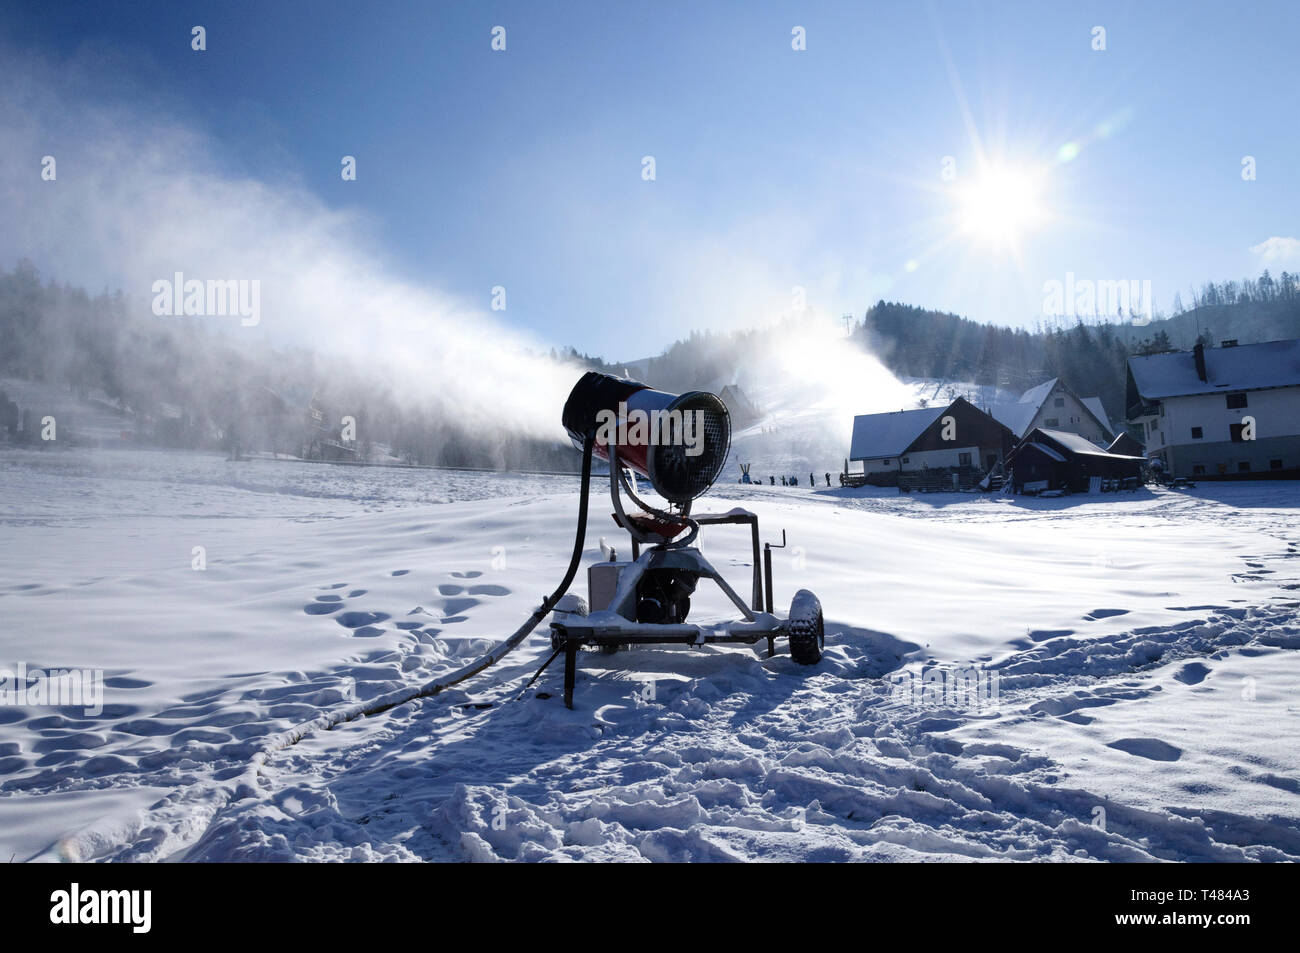 Snow Making Machine At A Ski Resort Stock Photo, Picture and Royalty Free  Image. Image 50770388.